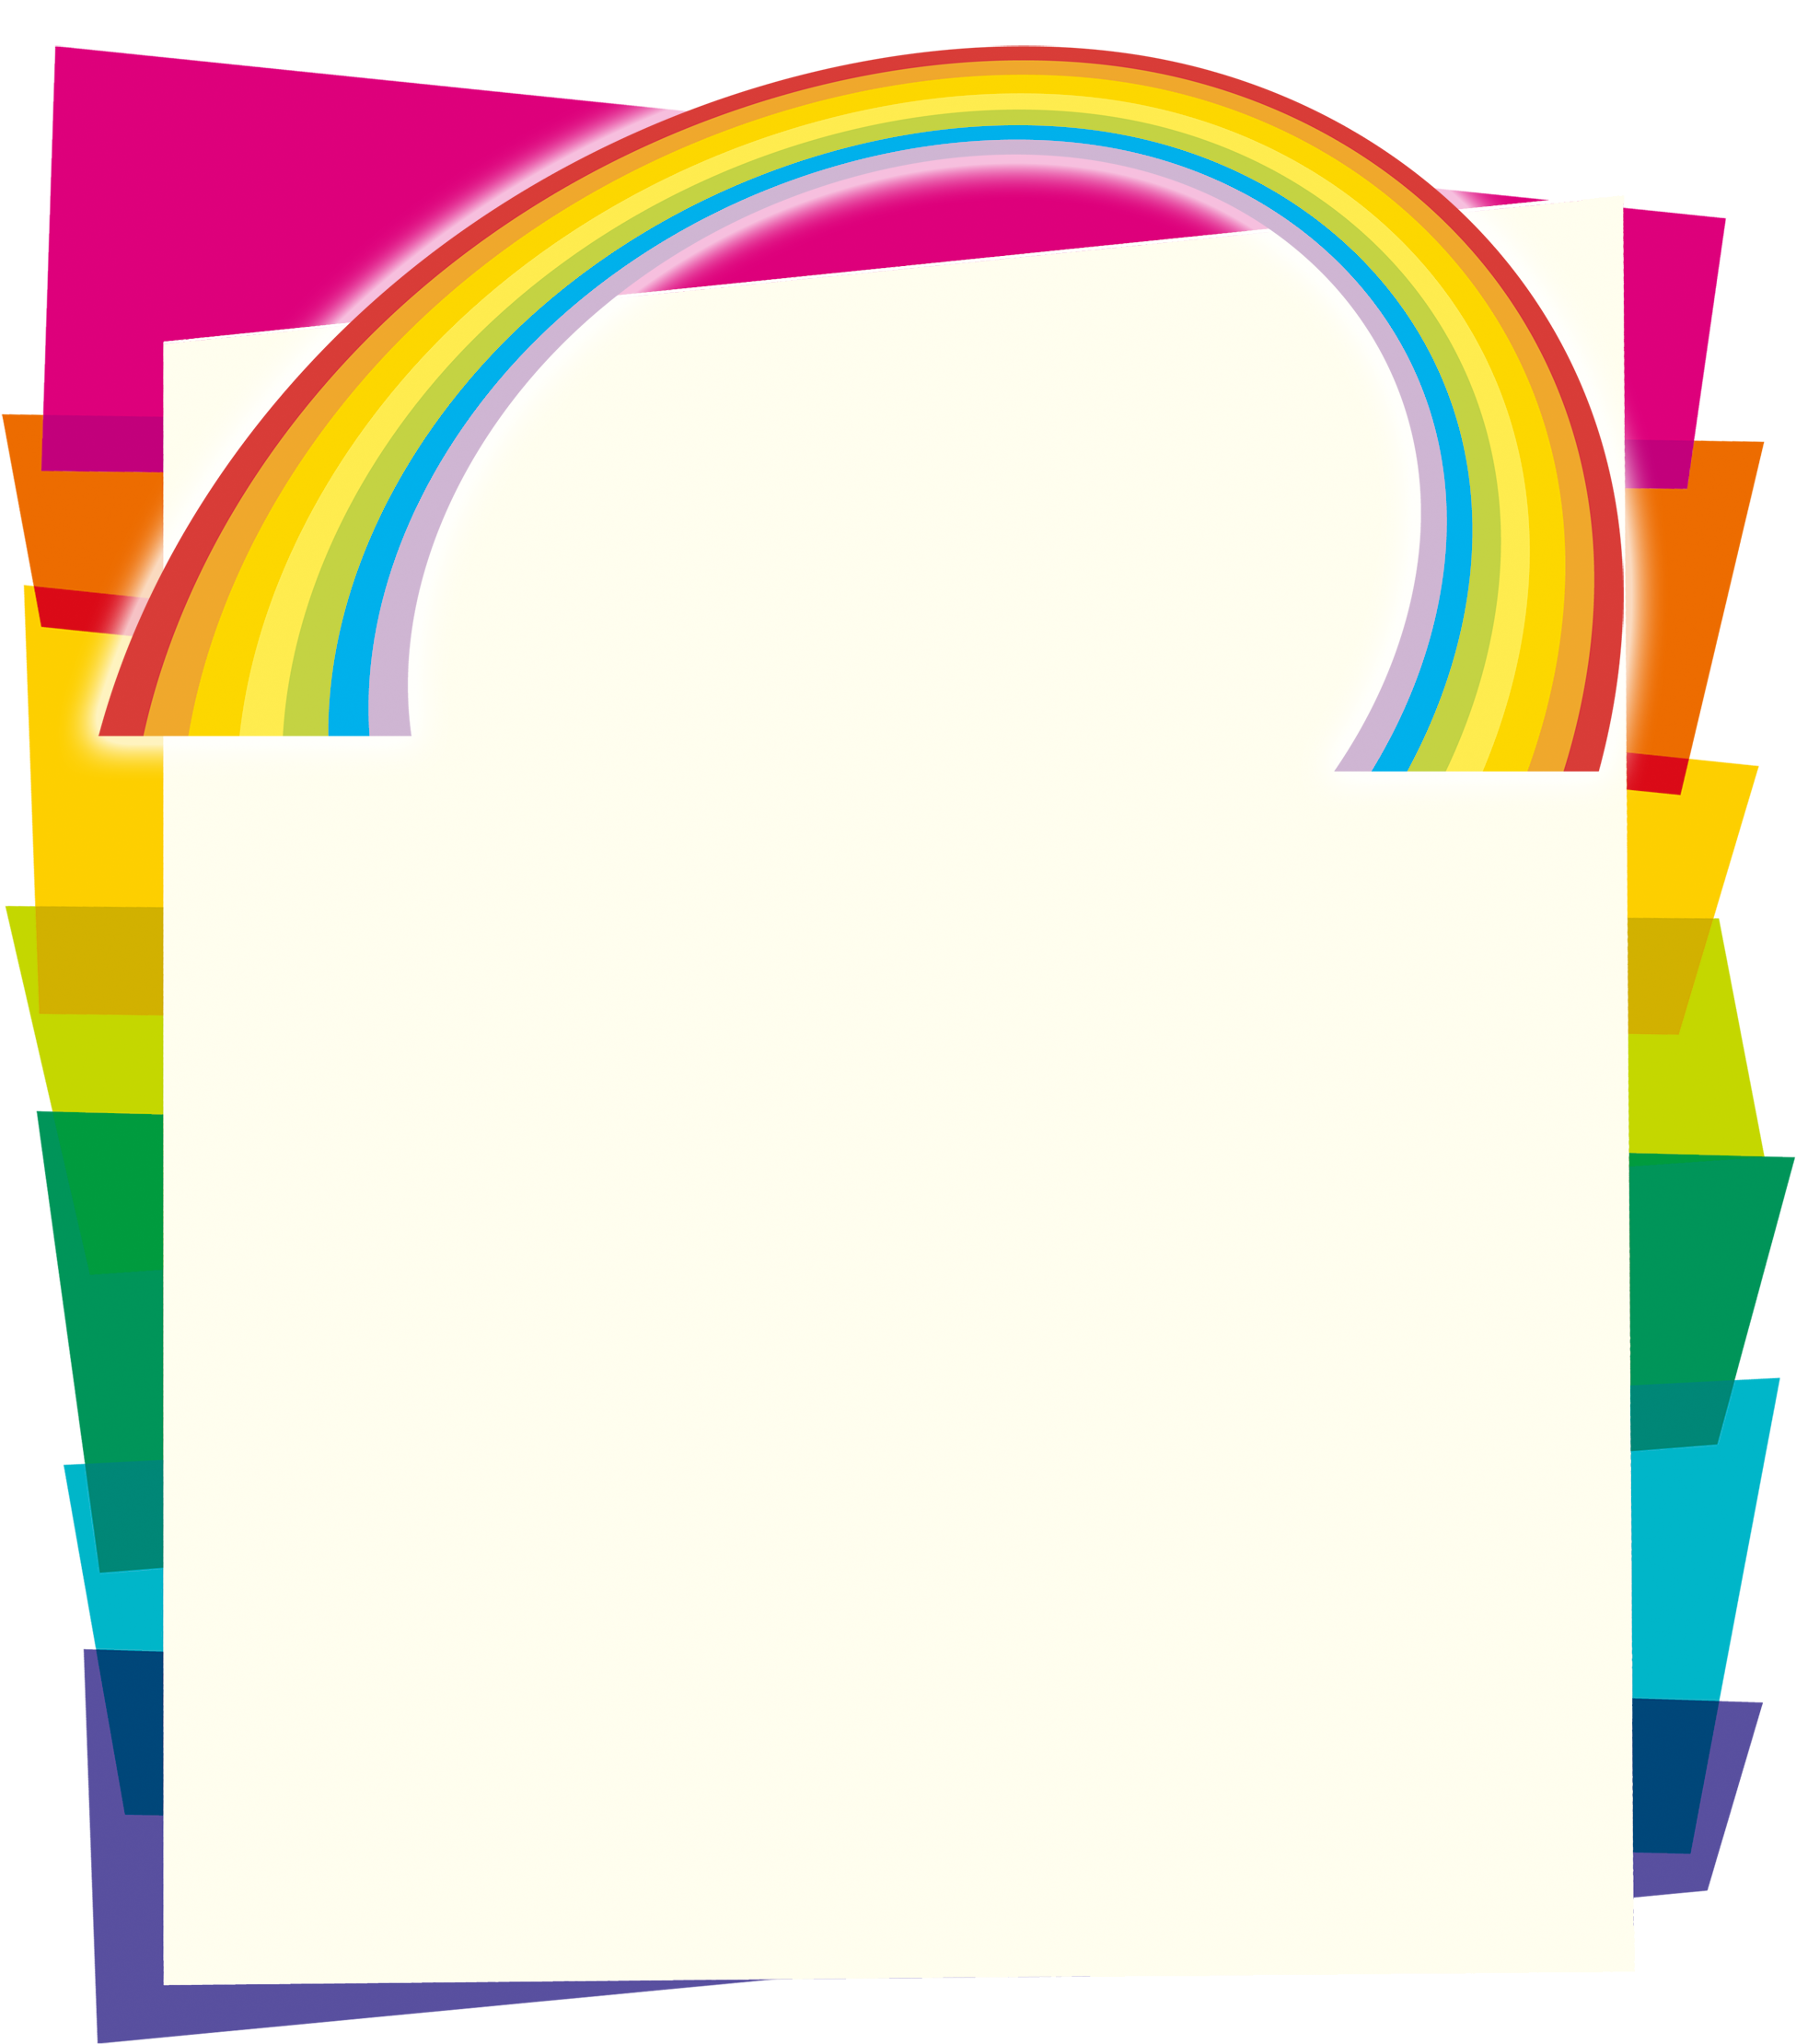 A Rainbow Over A White Square